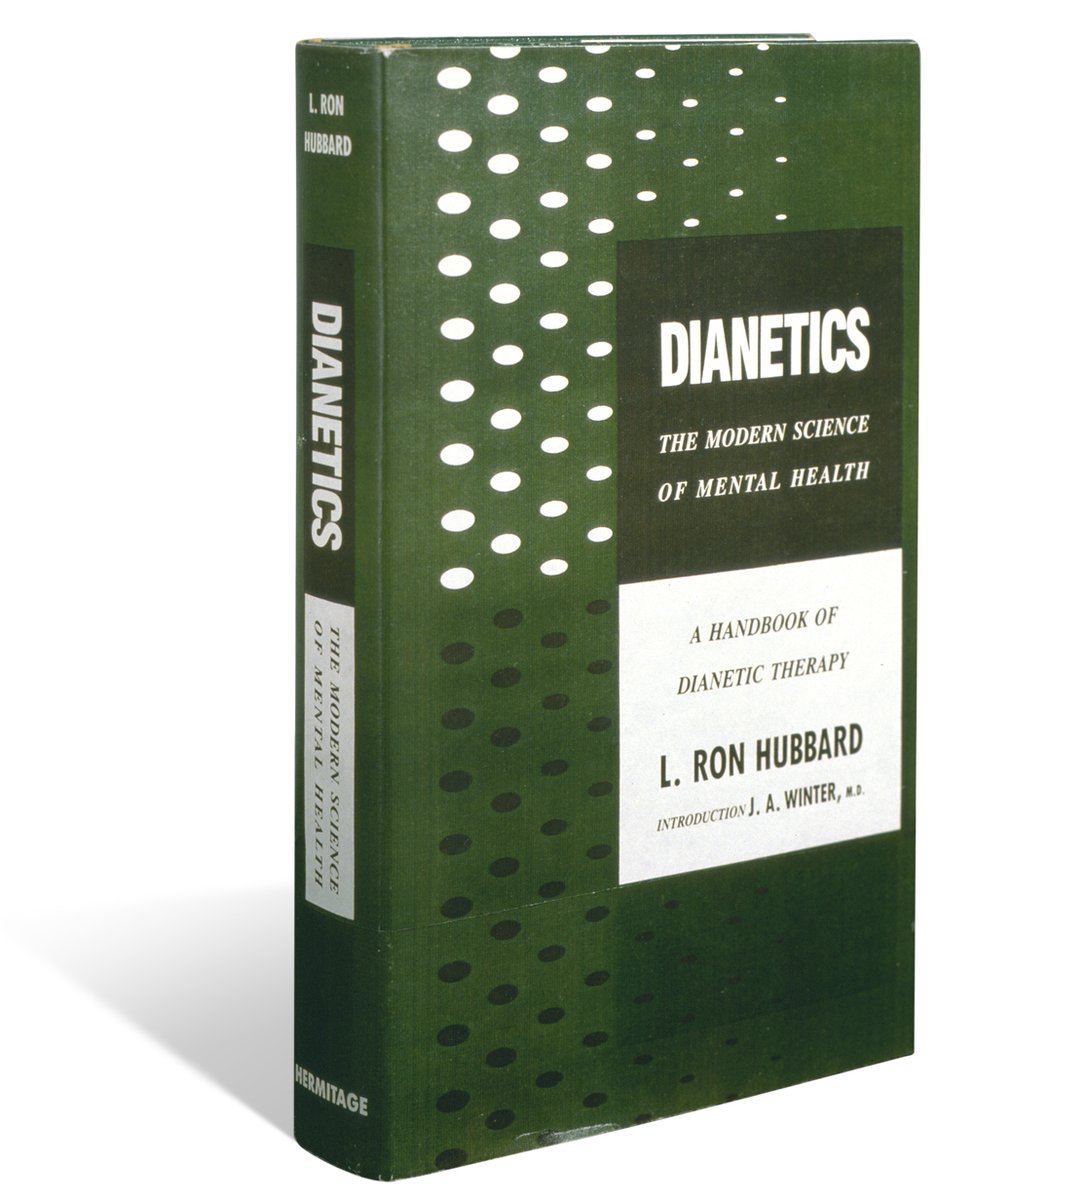 74 years ago TODAY the first edition of Dianetics: The Modern Science of Mental Health was published. 🎂🎉🥳